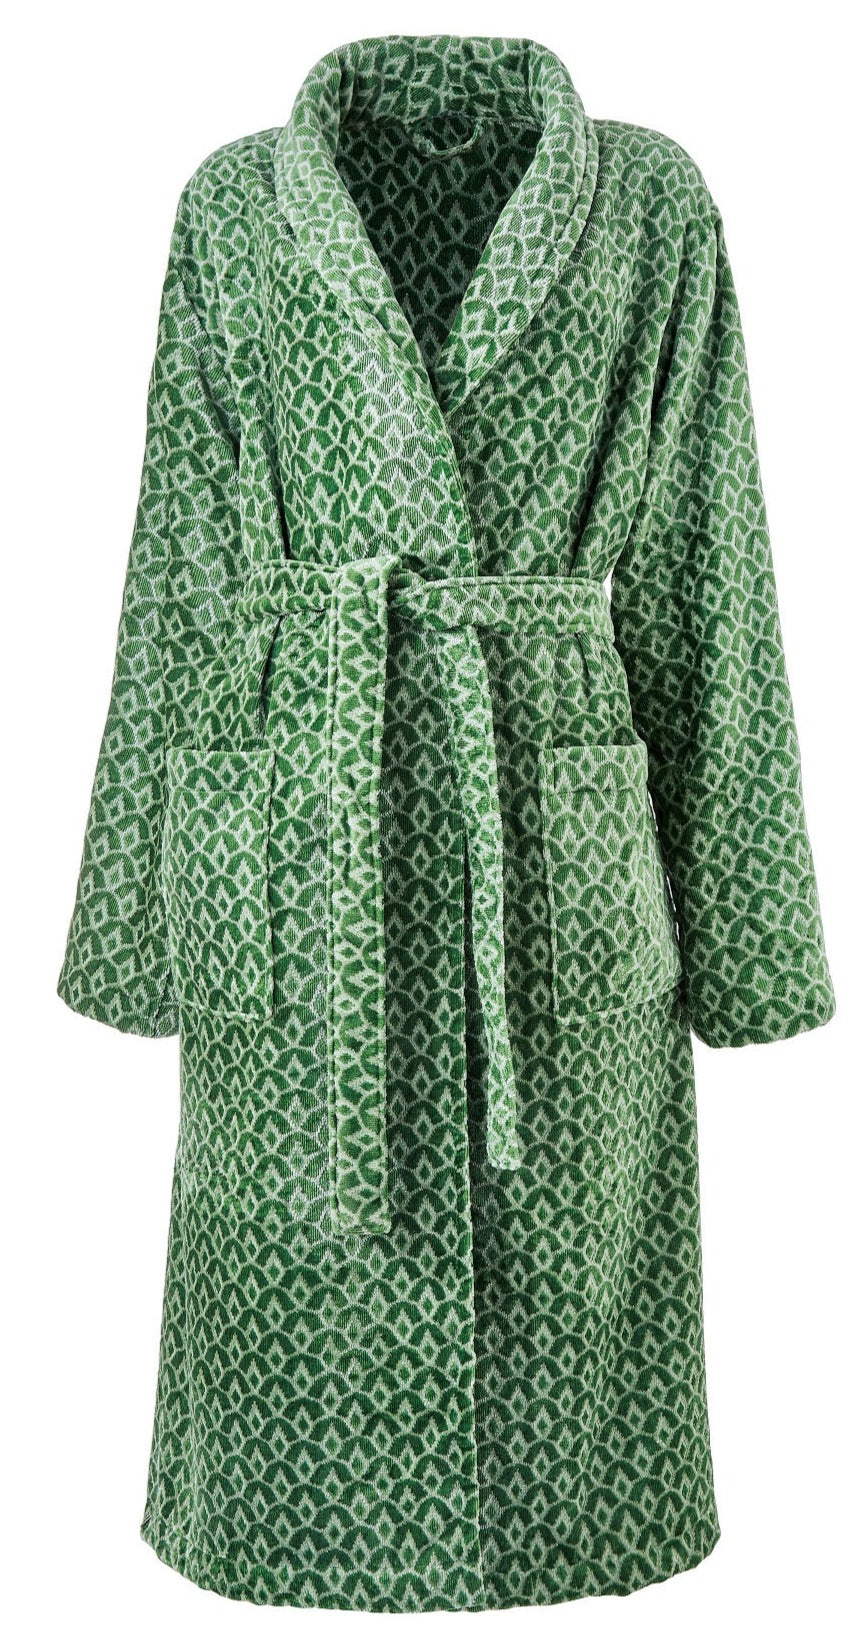 Ted Baker Baroque Bath Robe, Gold at John Lewis & Partners